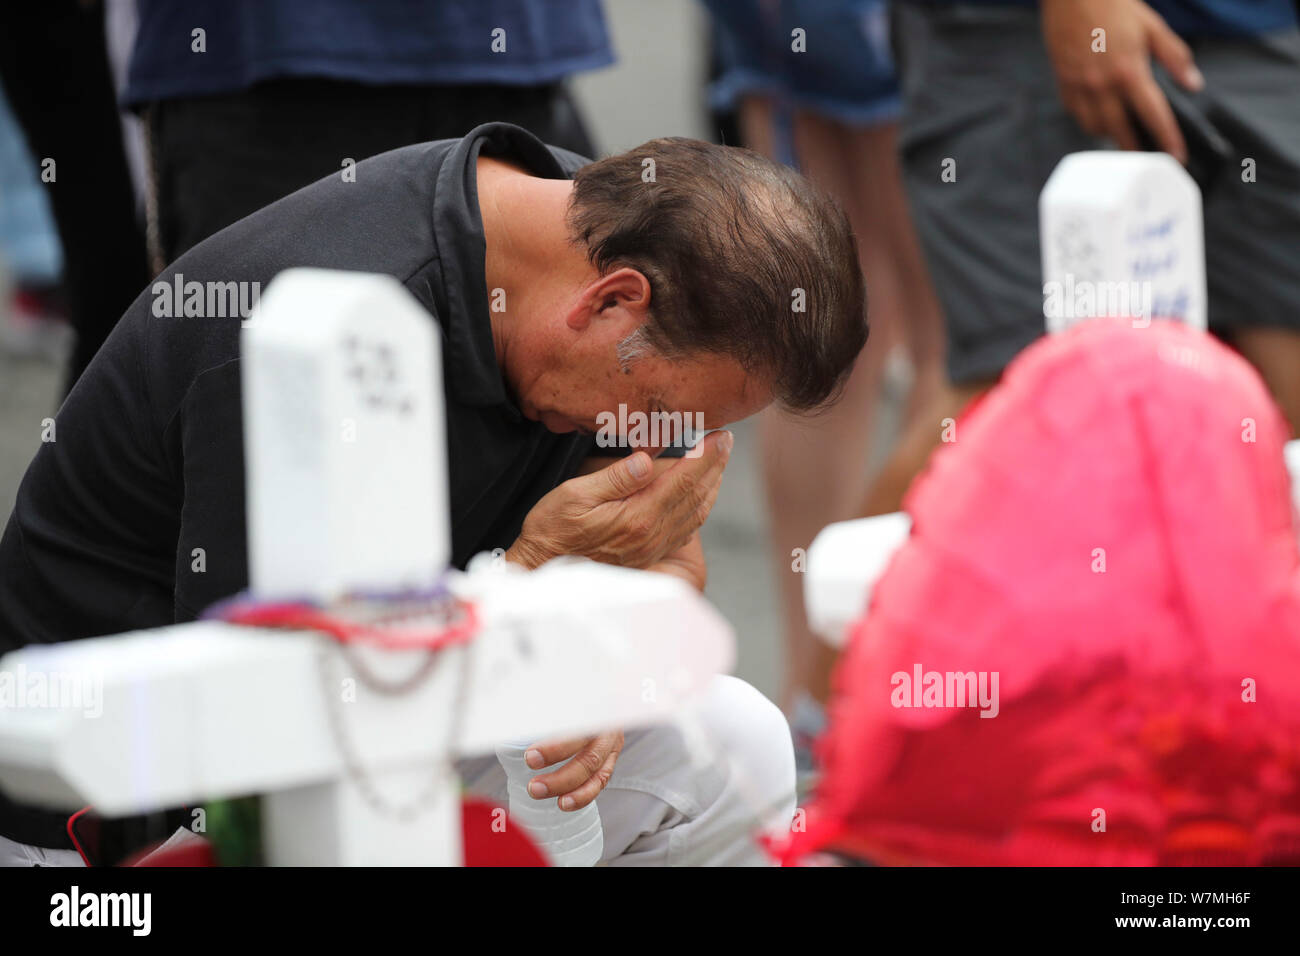 El Paso, USA. 6th Aug, 2019. People mourn for victims near the Walmart center where Saturday's massive shooting took place, in El Paso, Texas, the United States, Aug. 6, 2019. Credit: Wang Ying/Xinhua/Alamy Live News Stock Photo